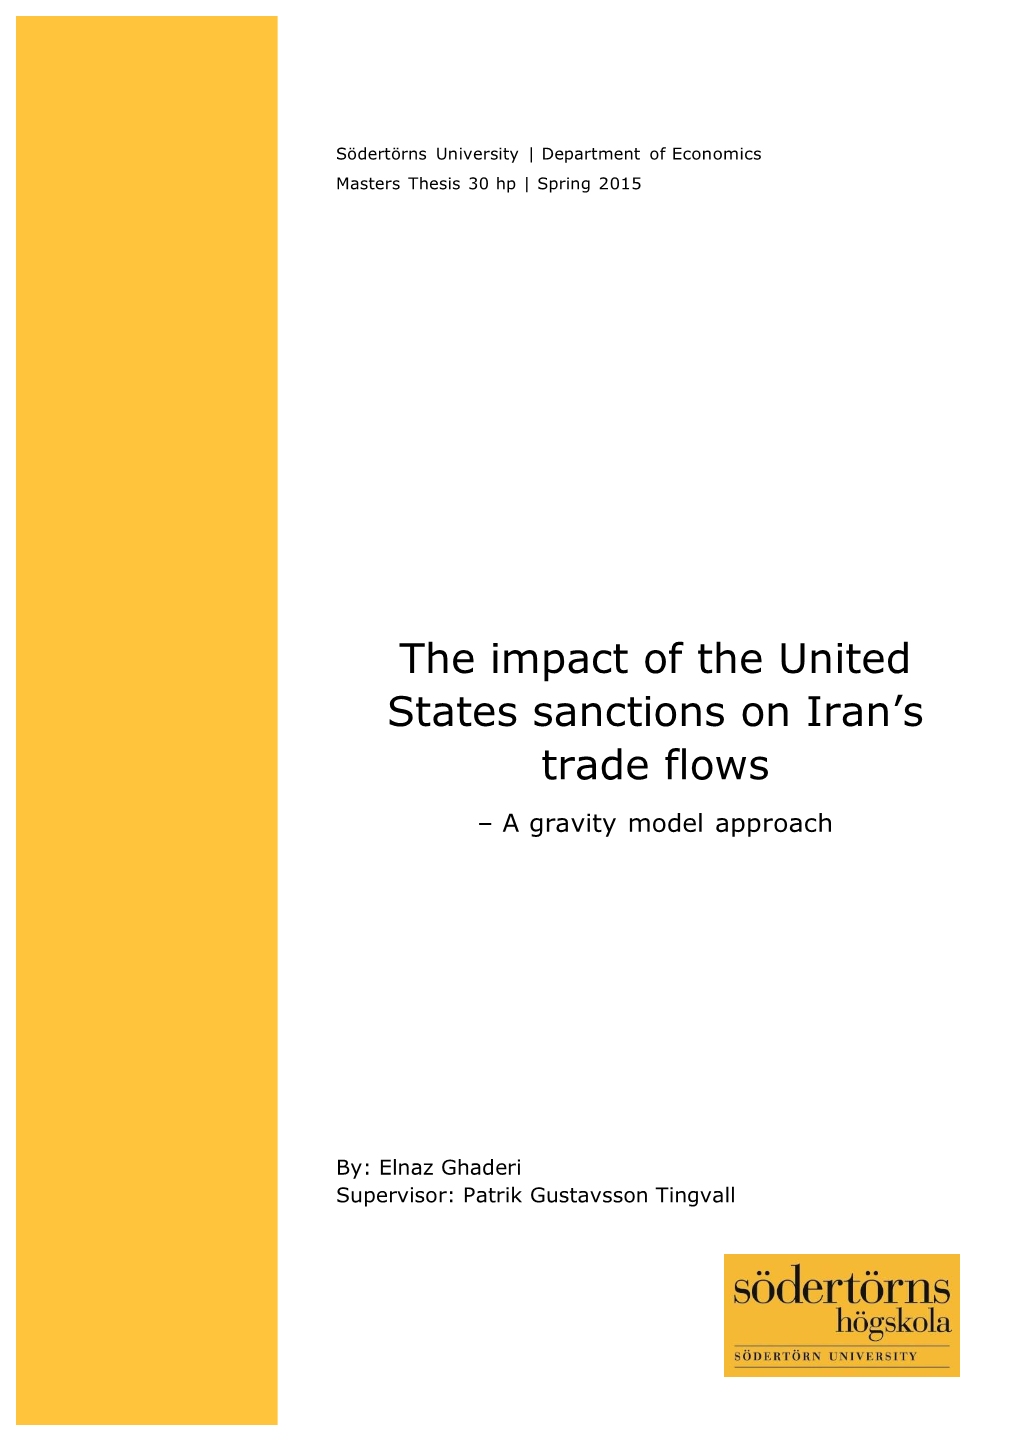 The Impact of the United States Sanctions on Iran's Trade Flows